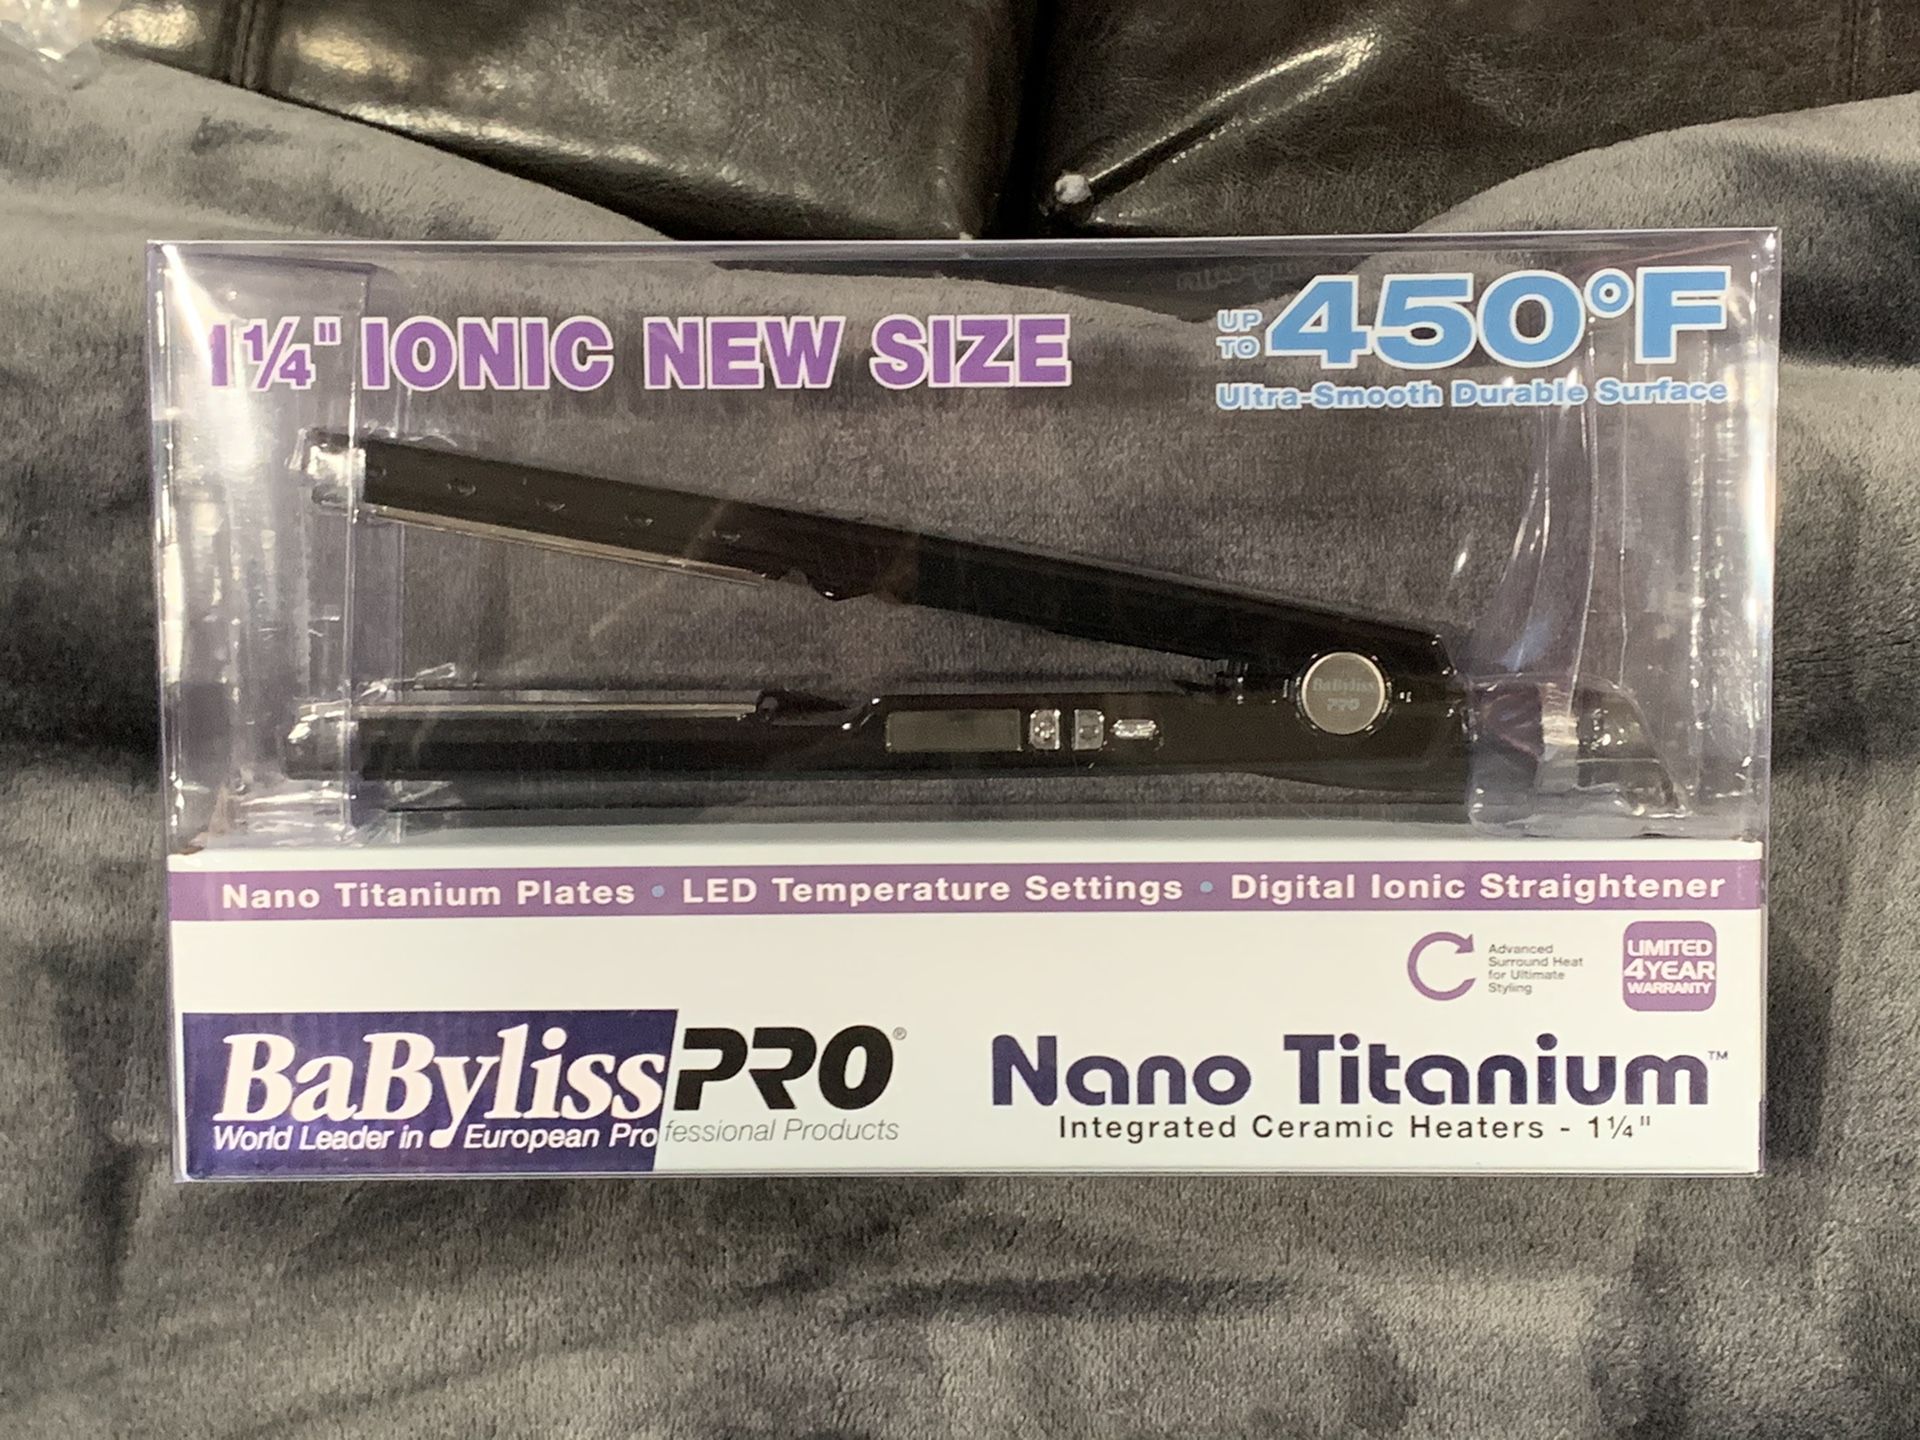 Babyliss pro nano titanium plated 1 1/4 flat New Size iron hair straightener. Condition is New. Shipped with USPS Priority Mail.